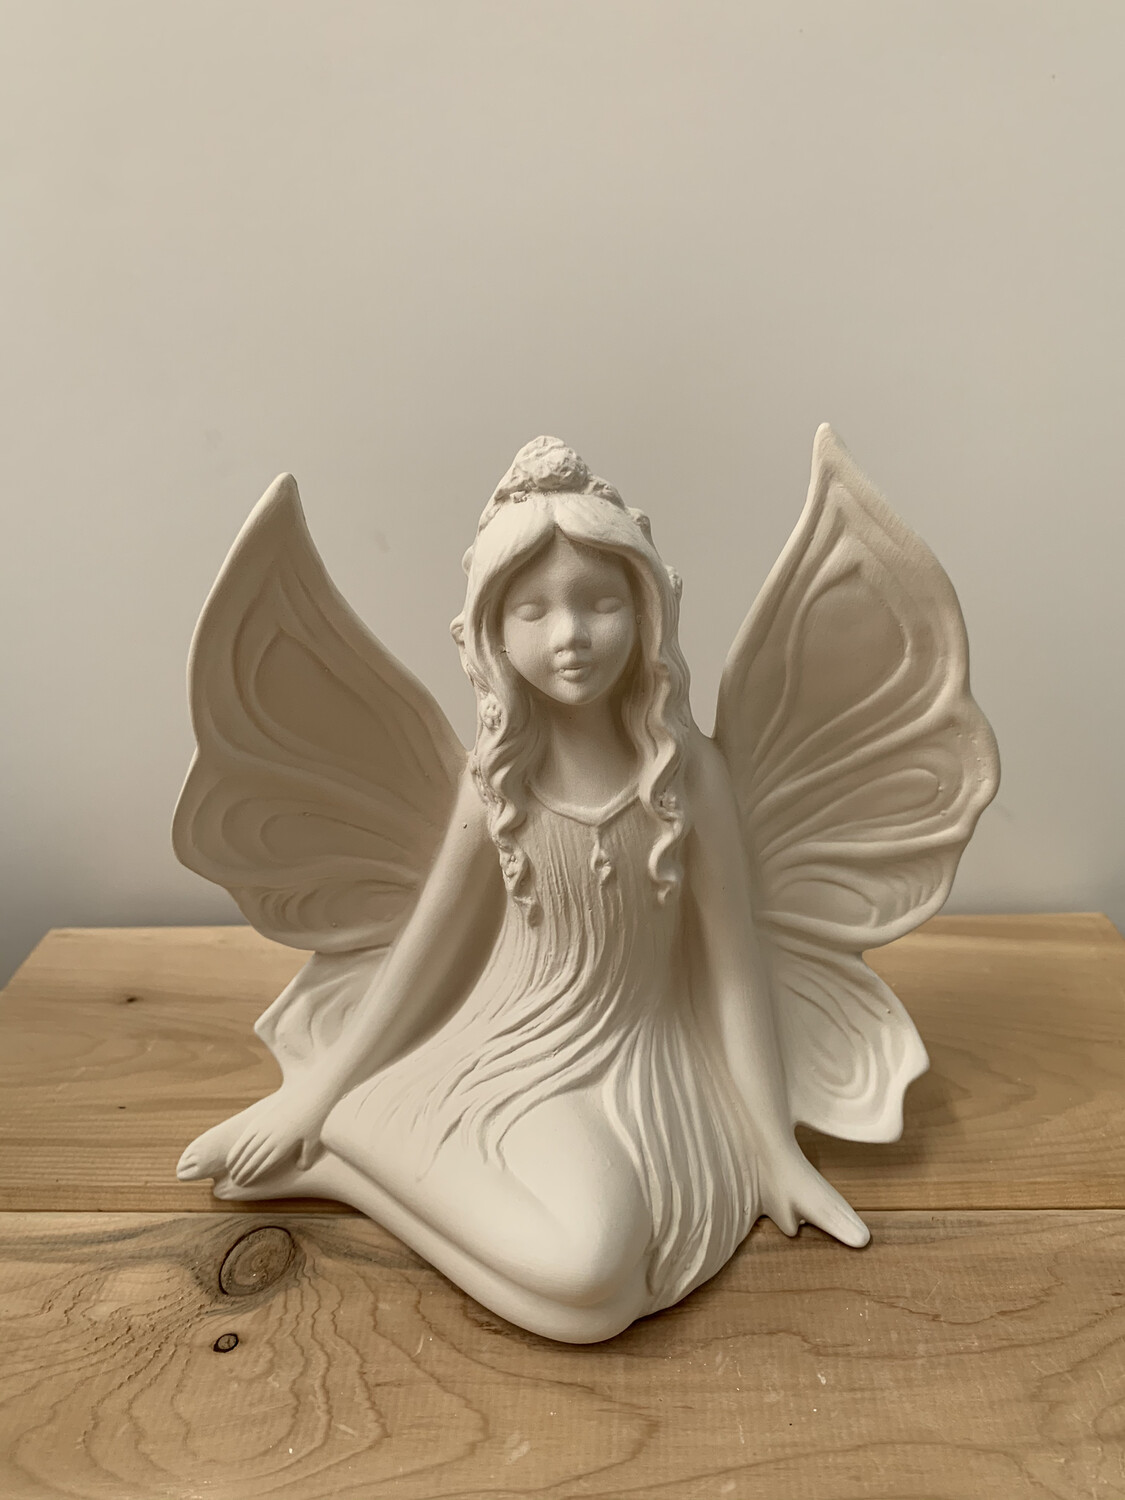 Paint Your Own Pottery - Ceramic
Side Sitting Fairy Figurine Painting Kit